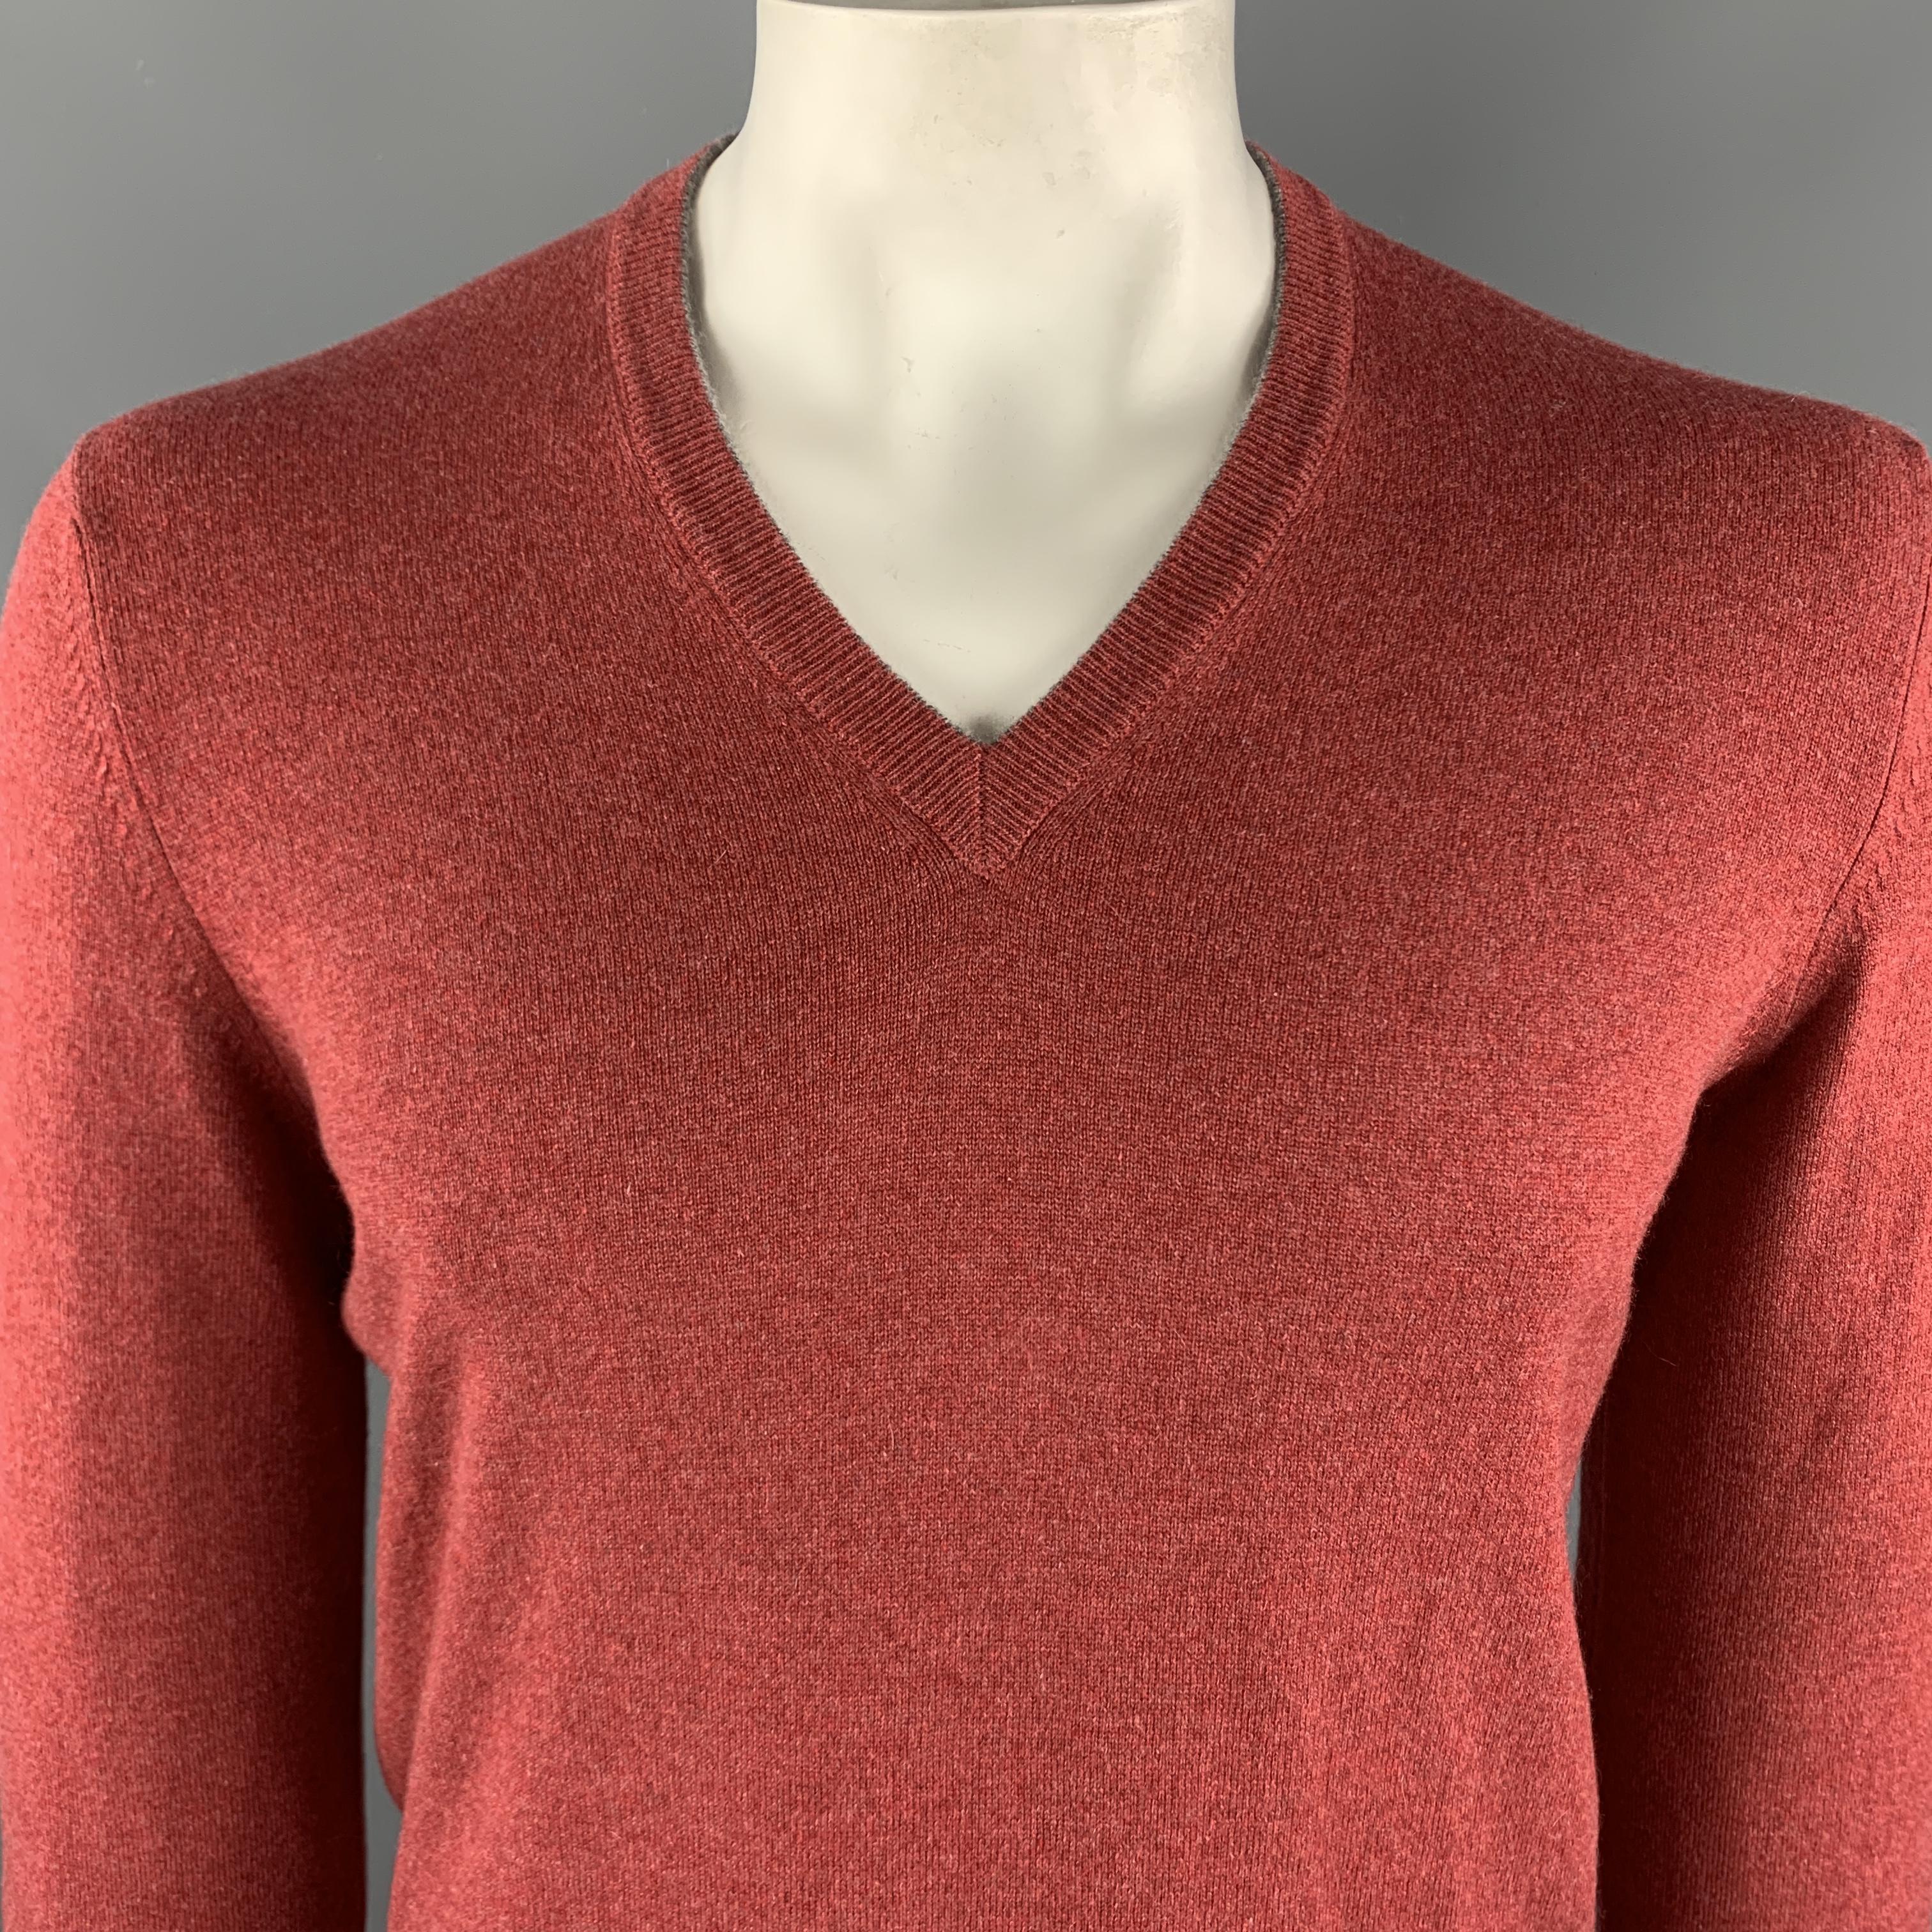 BRUNELLO CUCINELLI Pullover Sweater comes in a brick tone in a knitted wool cashmere material, with a V-neck, and ribbed cuffs and hem. Made in Italy.

Excellent Pre-Owned Condition.
Marked: IT 50

Measurements:

Shoulder: 18 in. 
Chest: 44 in.